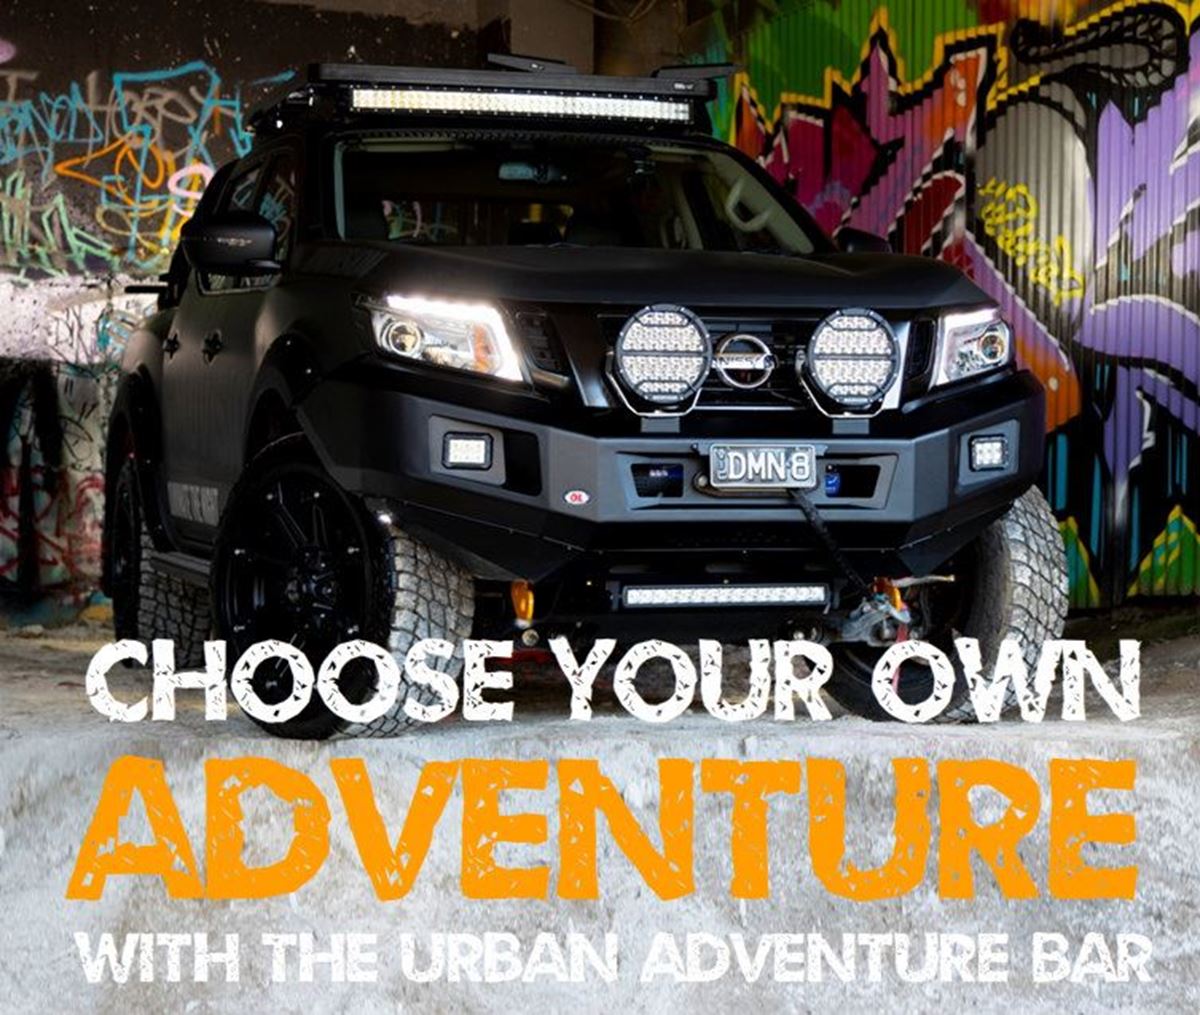 Let the Adventure Begin with the ALL NEW Opposite Lock Urban Adventure Bar